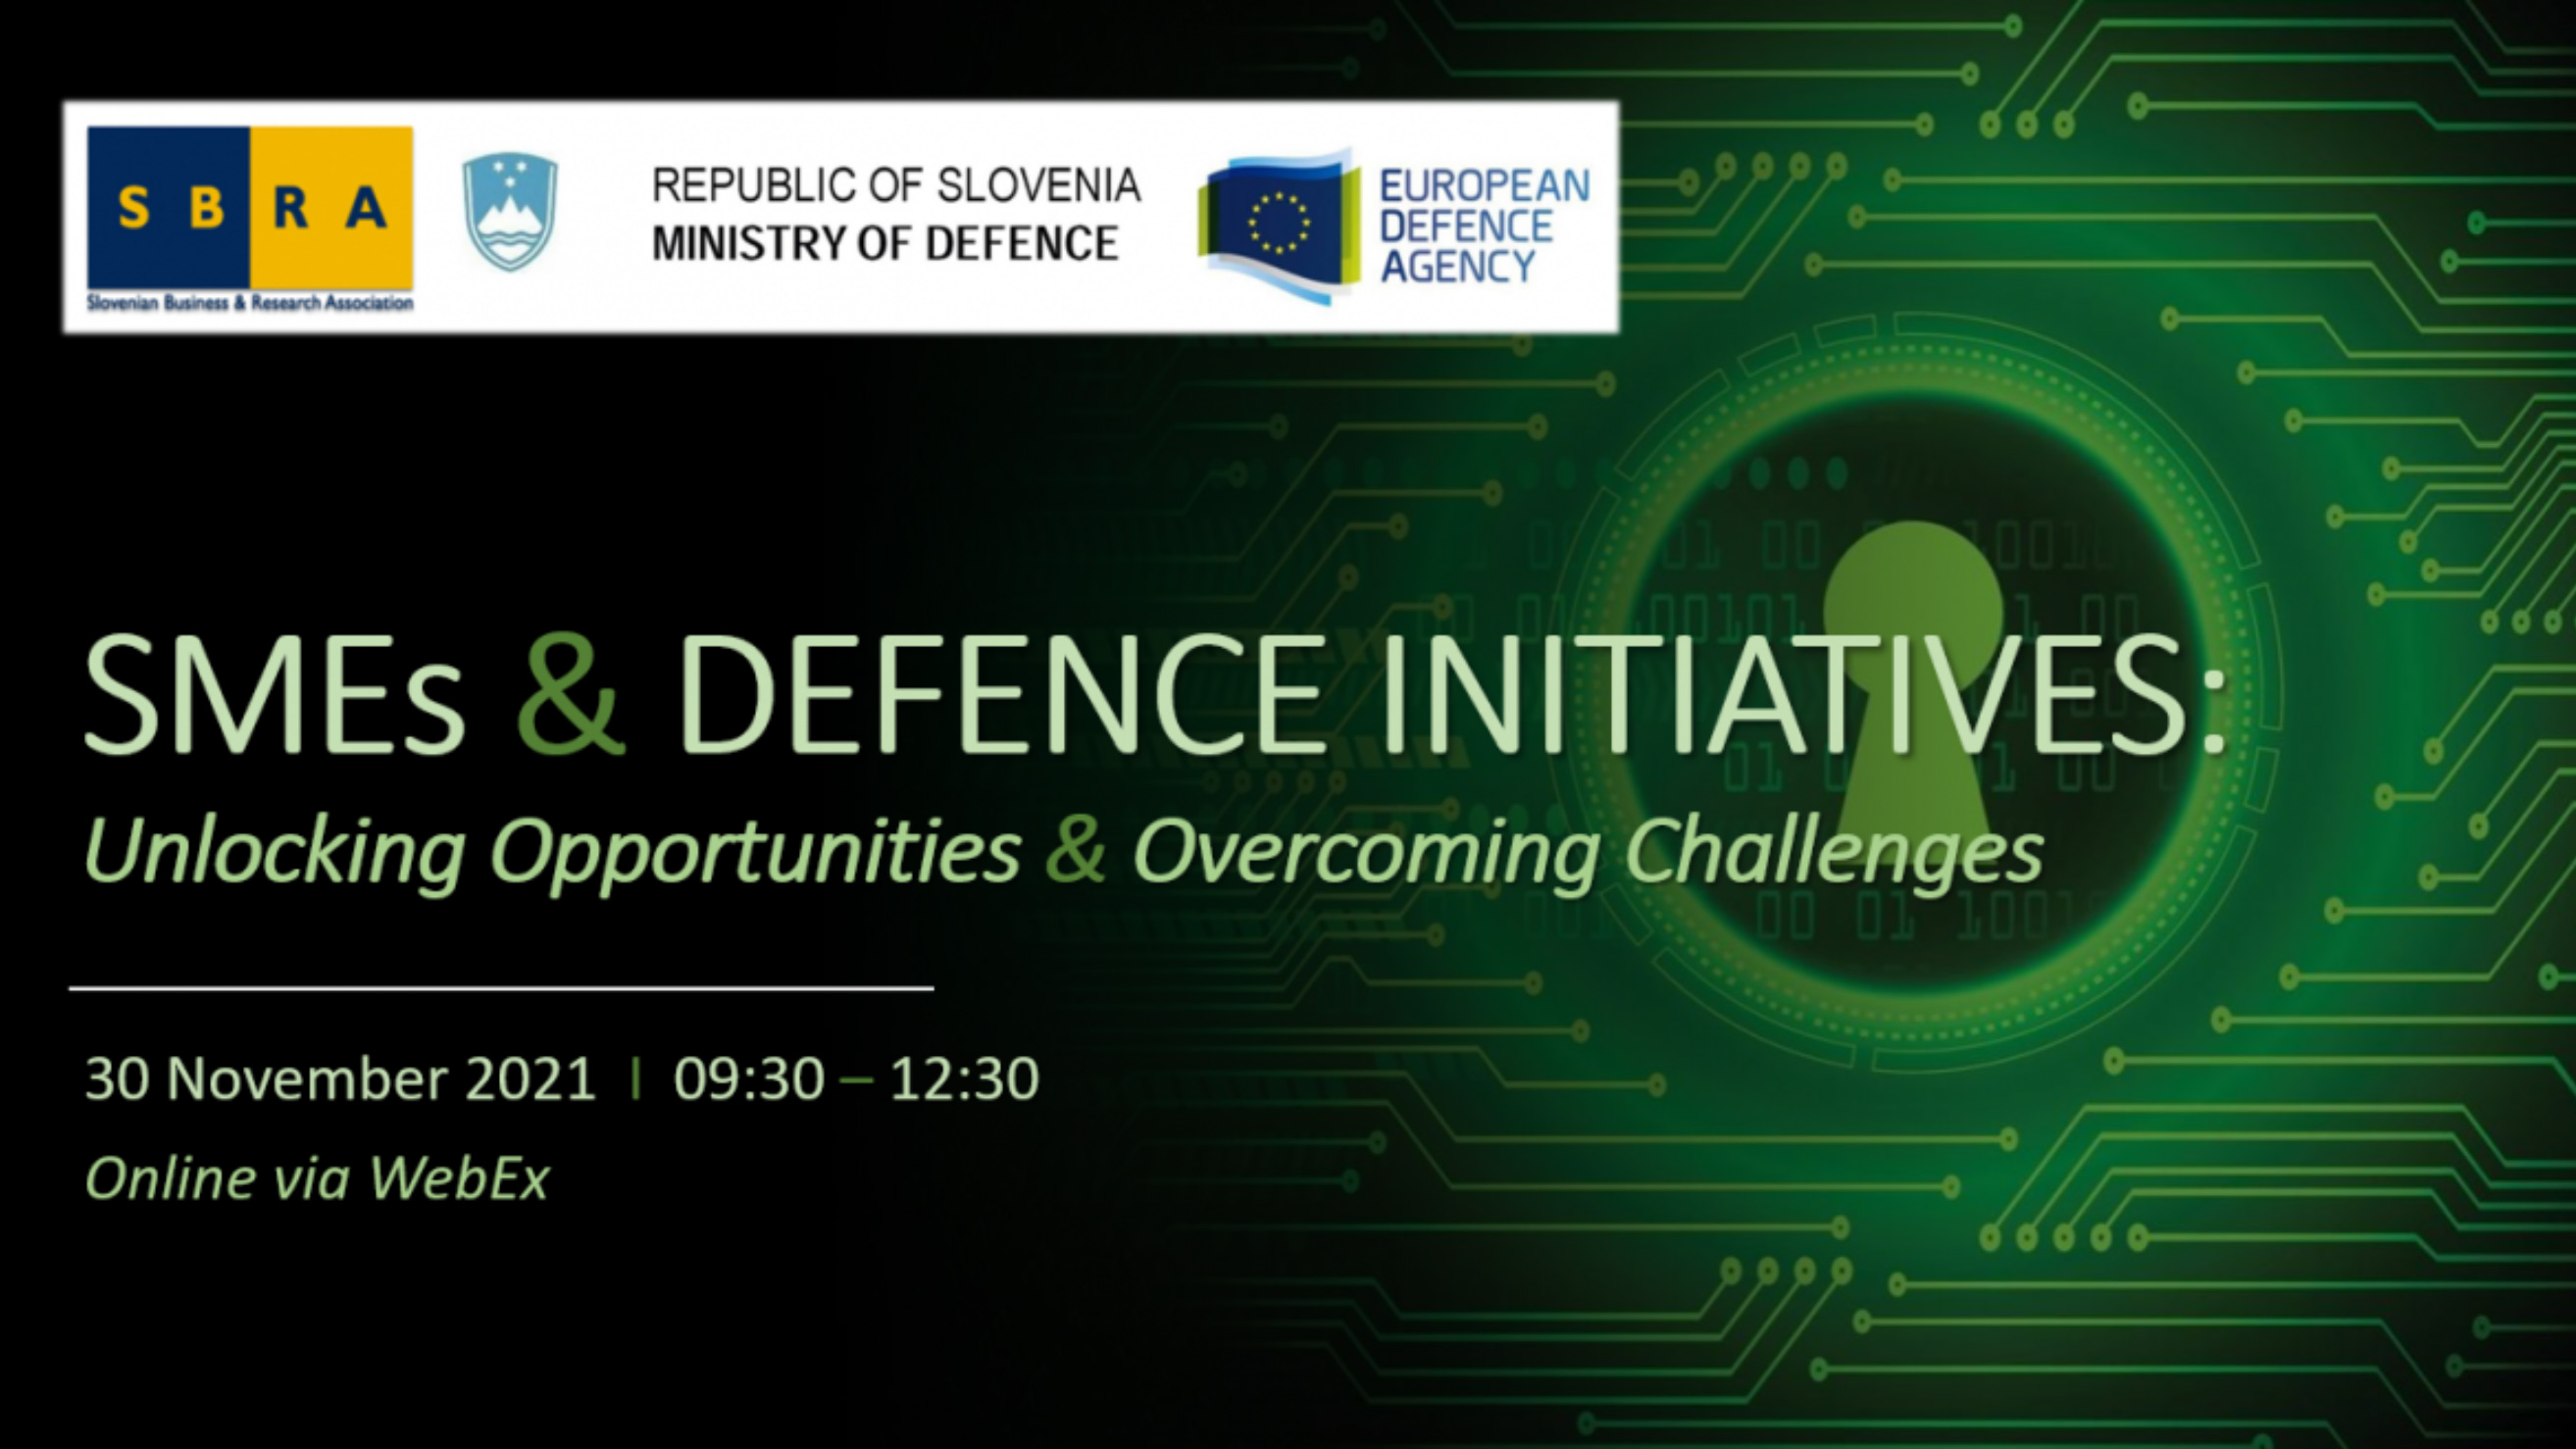 SMEs & DEFENCE INITIATIVES: Unlocking Opportunities & Overcoming Challenges